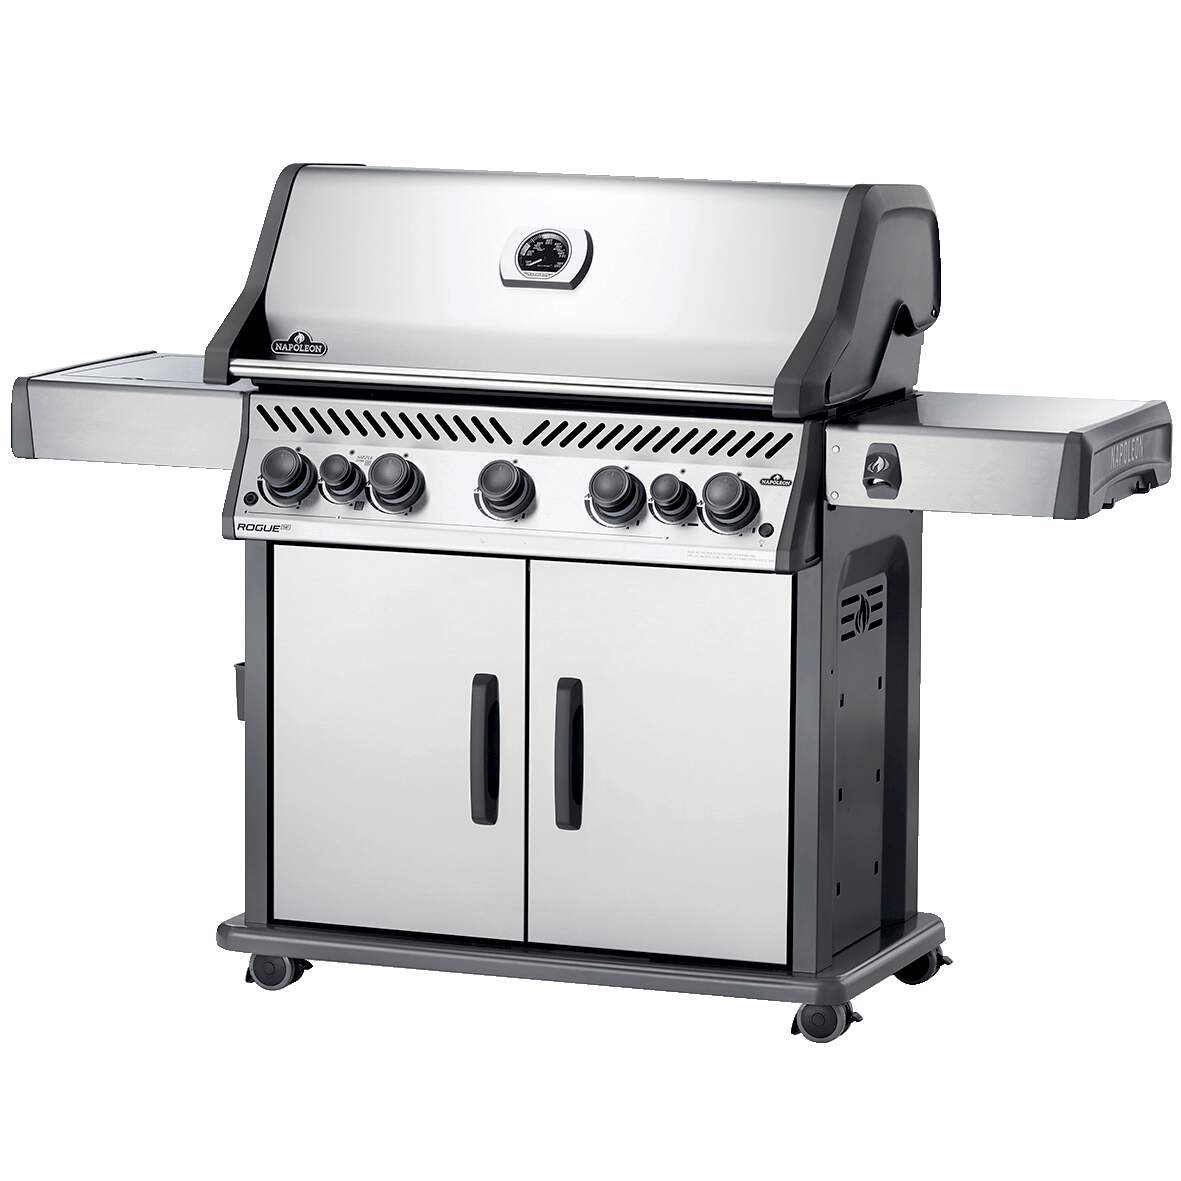 1259299 - Gasgrill Rogue SE 625 m. Sizzle Zone & Heckbrenner, ES